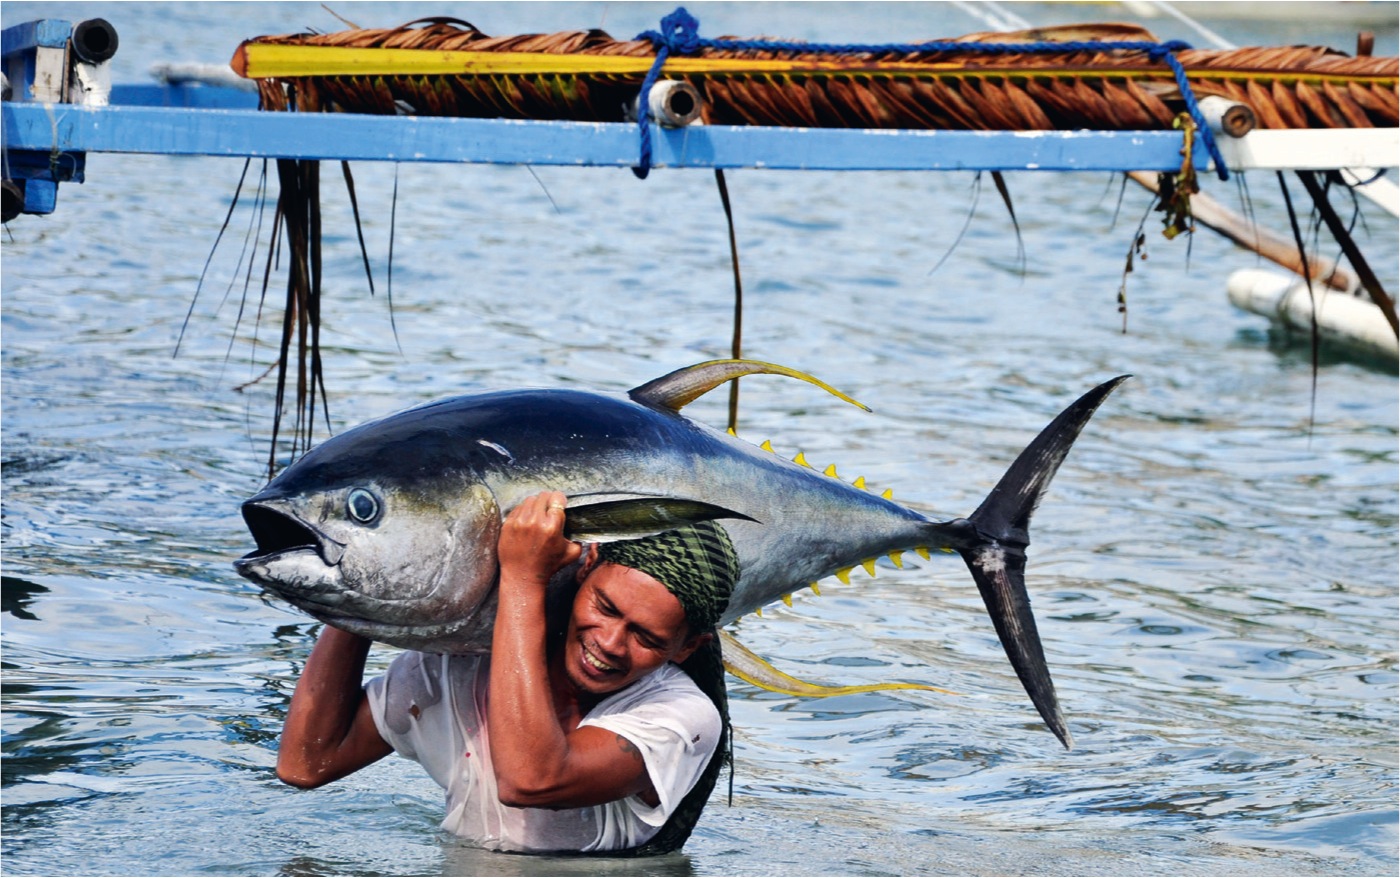 Philippine Tuna Fishing: 6 Important Things You Should Know About This 